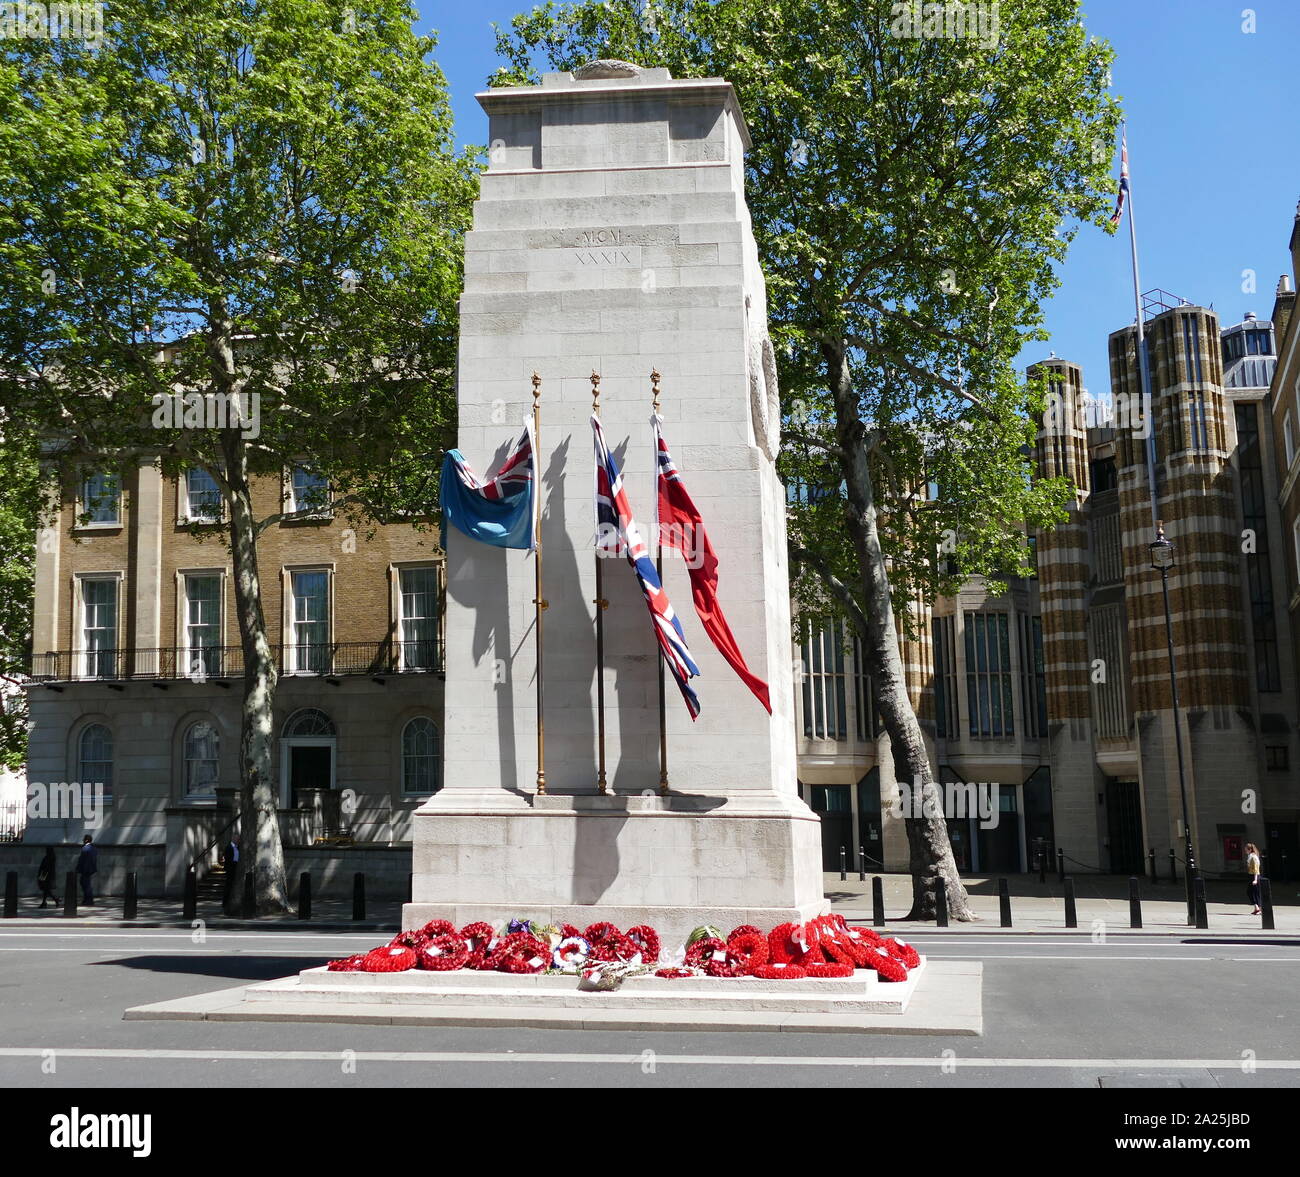 The Cenotaph war memorial on Whitehall in London, England. Its origin is in a temporary structure erected for a peace parade following the end of the First World War, and after an outpouring of national sentiment it was replaced in 1920 by a permanent structure and designated the United Kingdom's official national war memorial. Designed by Edwin Lutyens, the permanent structure was built from Portland stone between 1919 and 1920 Stock Photo